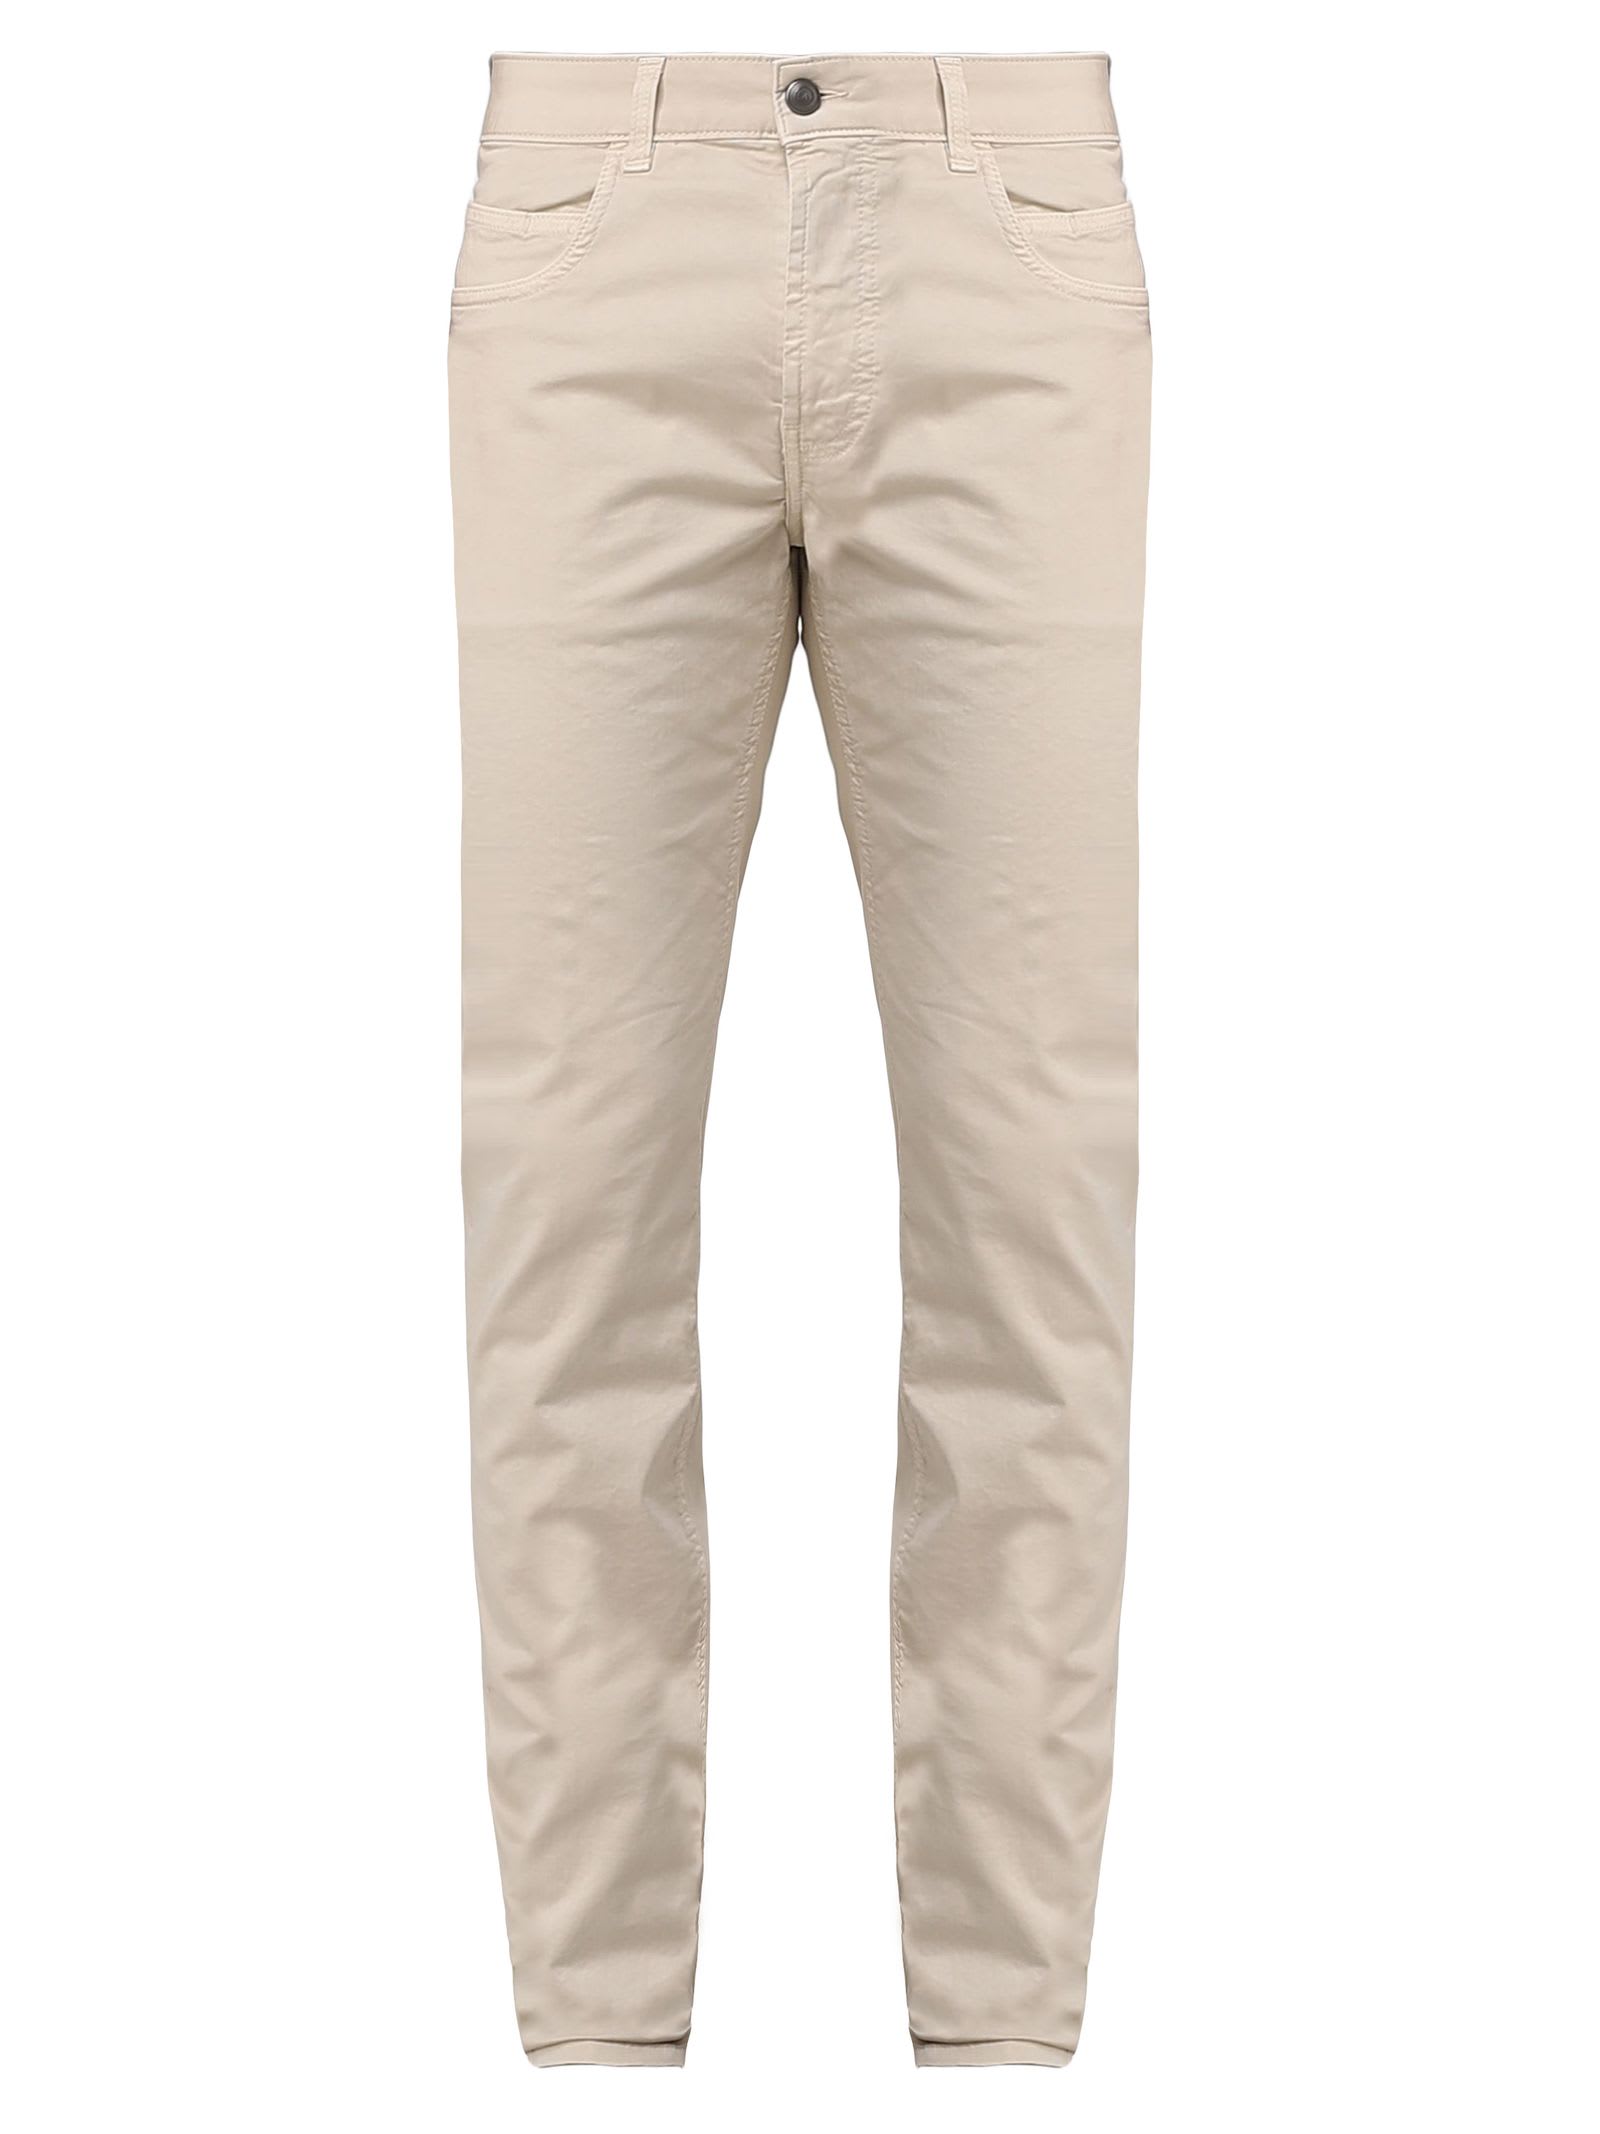 FAY BEIGE COTTON SLIM FIT TROUSERS